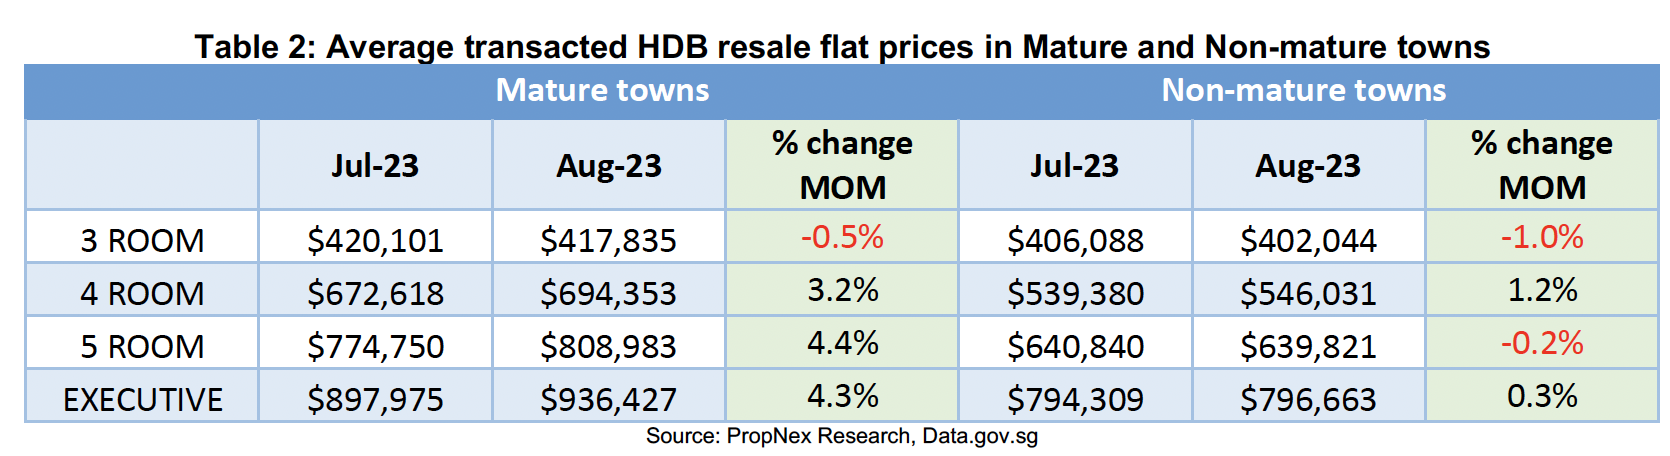 table showing Average transacted HDB resale flat prices in Mature and Non-mature towns for Jul 2023 and Aug 2023